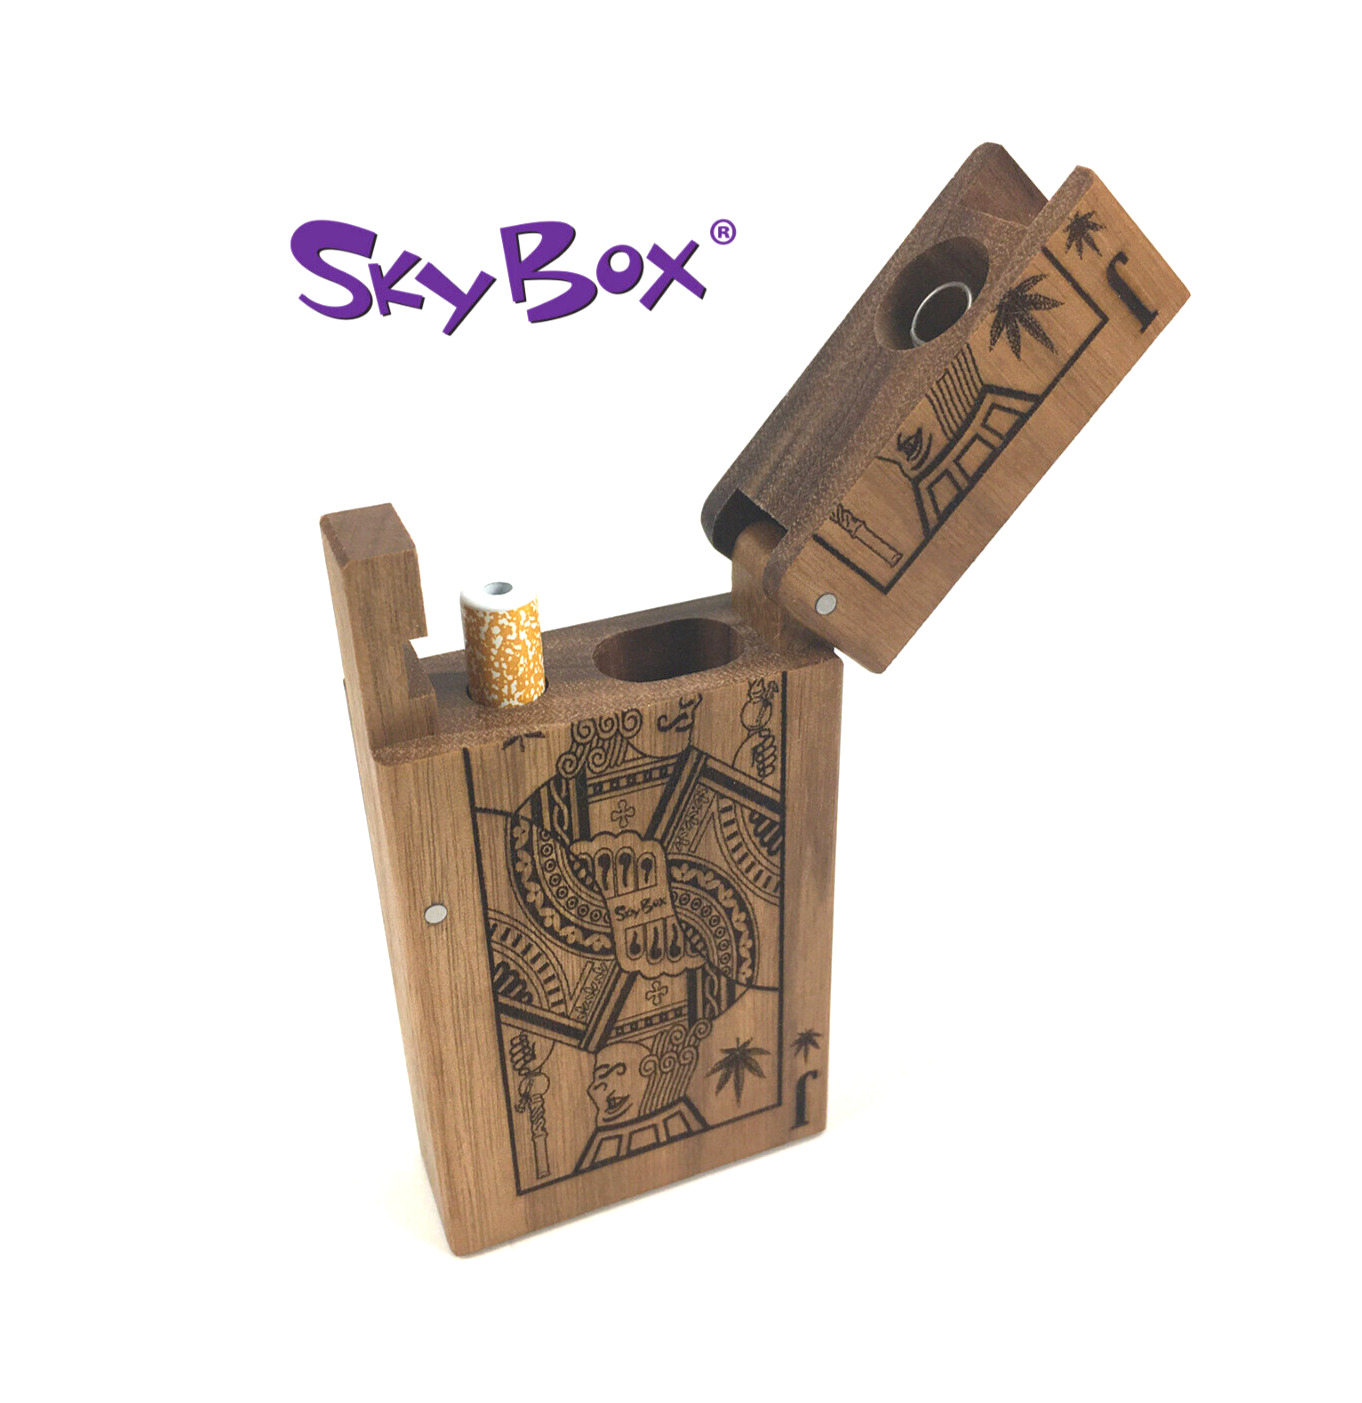 SkyBox® dugout with cigarette style one hitter – Laser Engraved, Jackpot